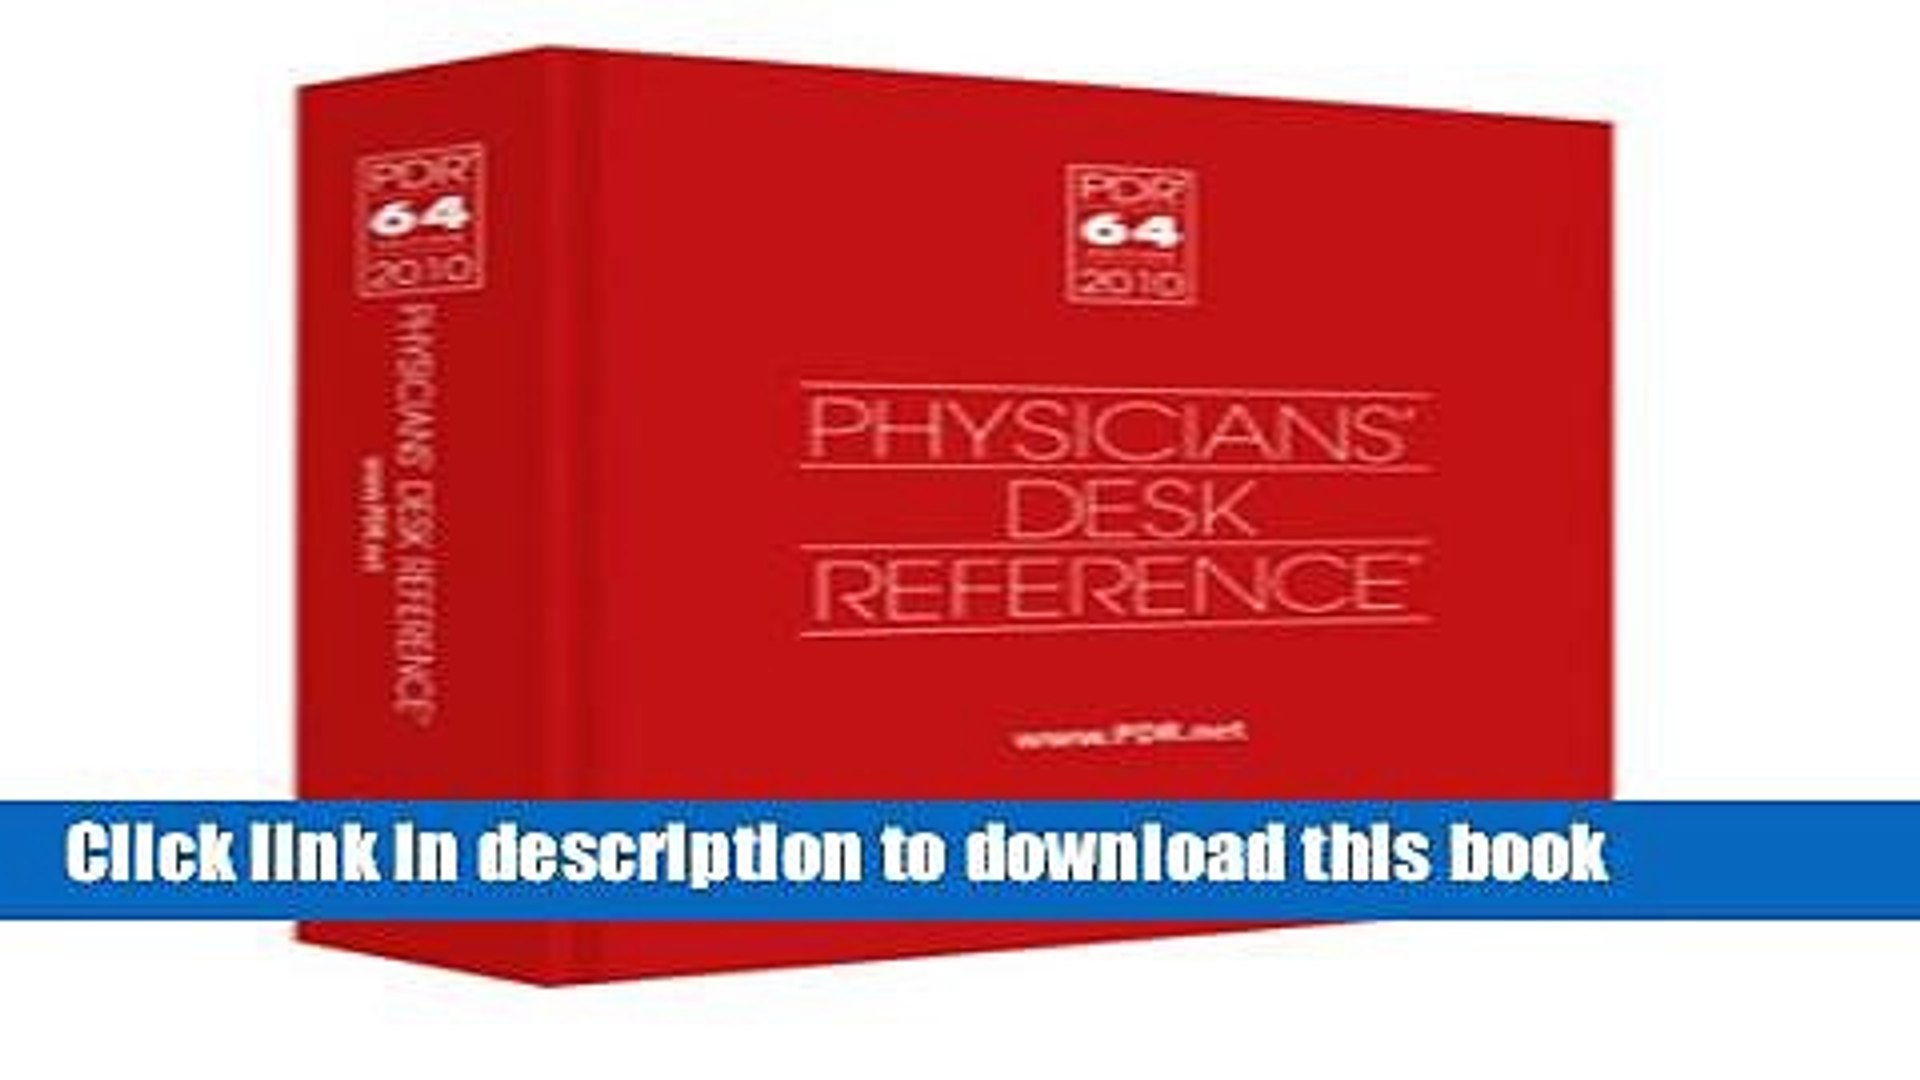 Ebook 2010 Physicians Desk Reference Library Hospital Ver Full